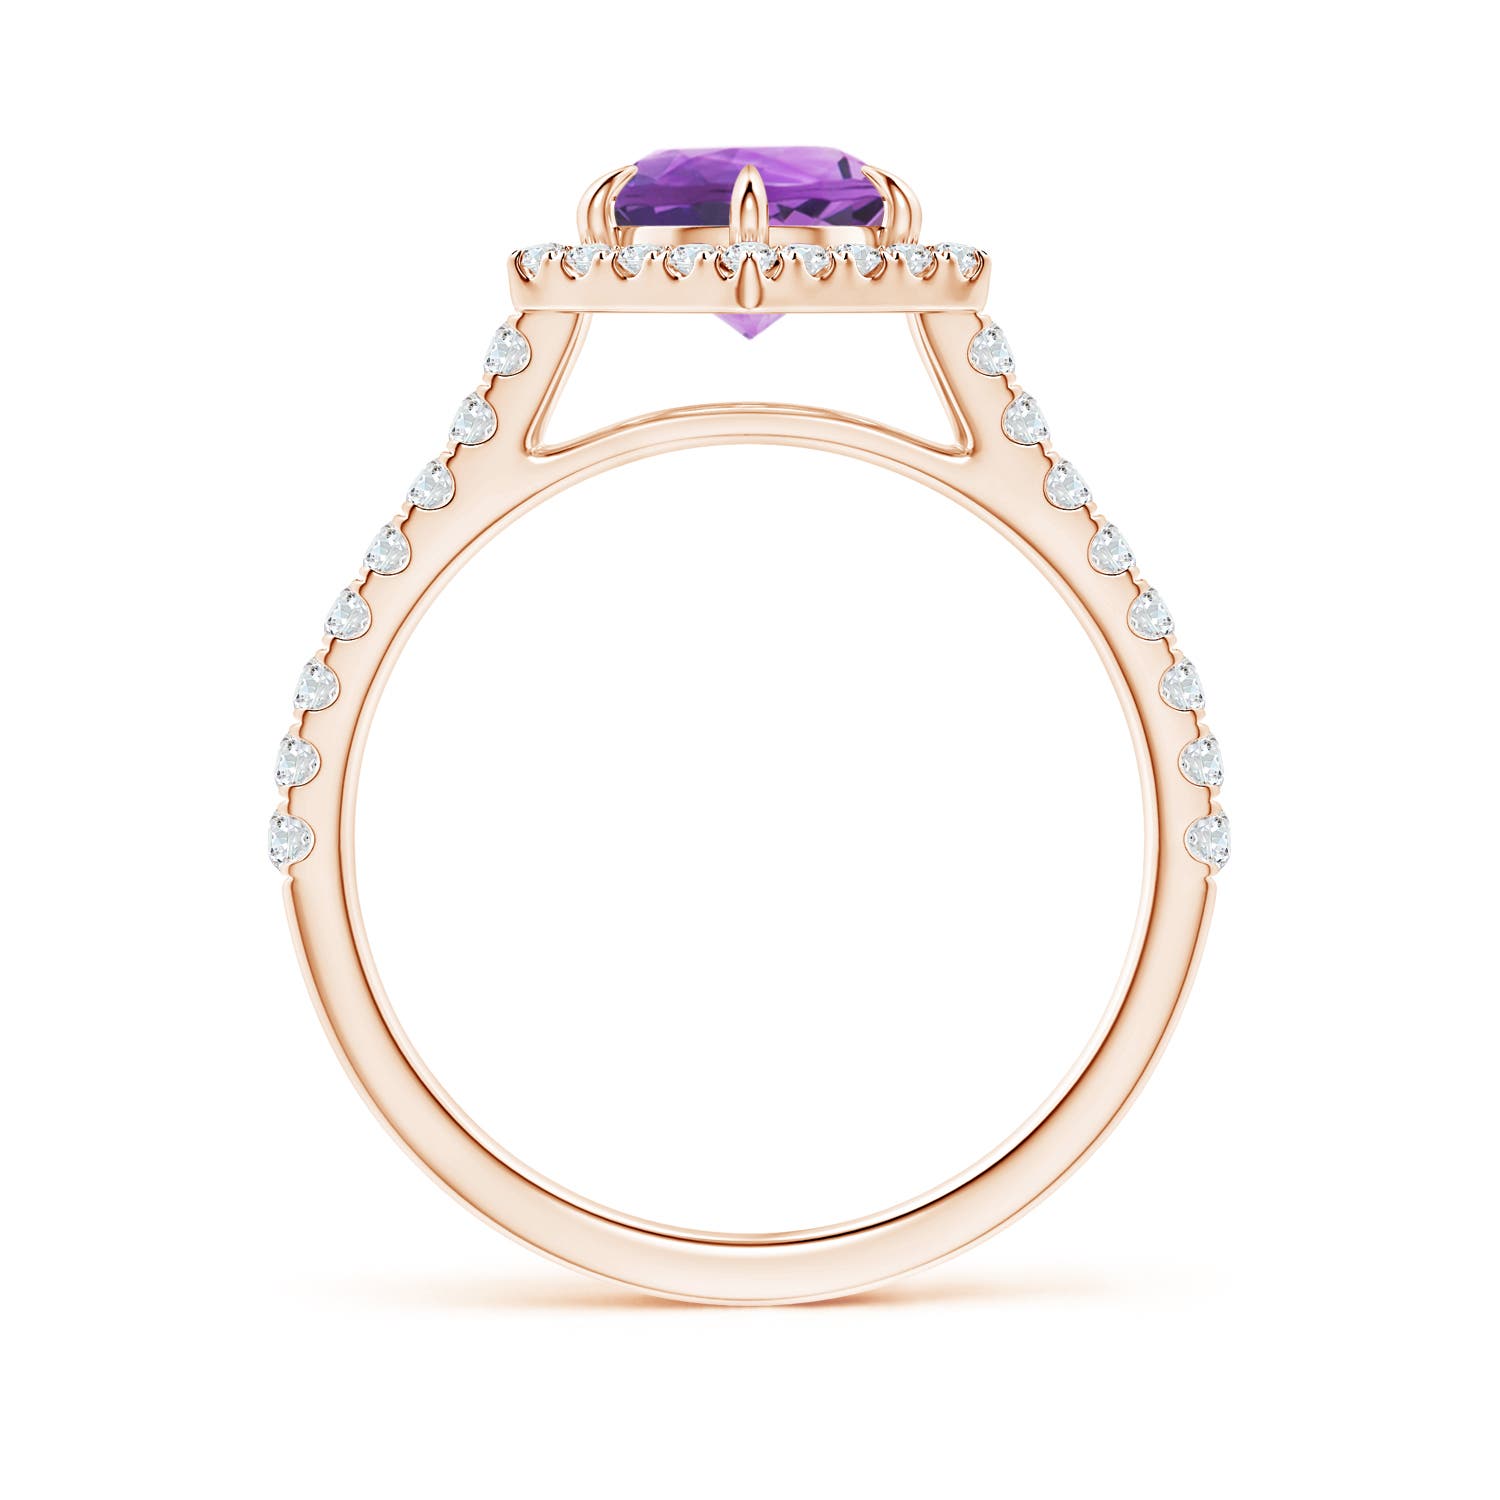 AA - Amethyst / 1.57 CT / 14 KT Rose Gold